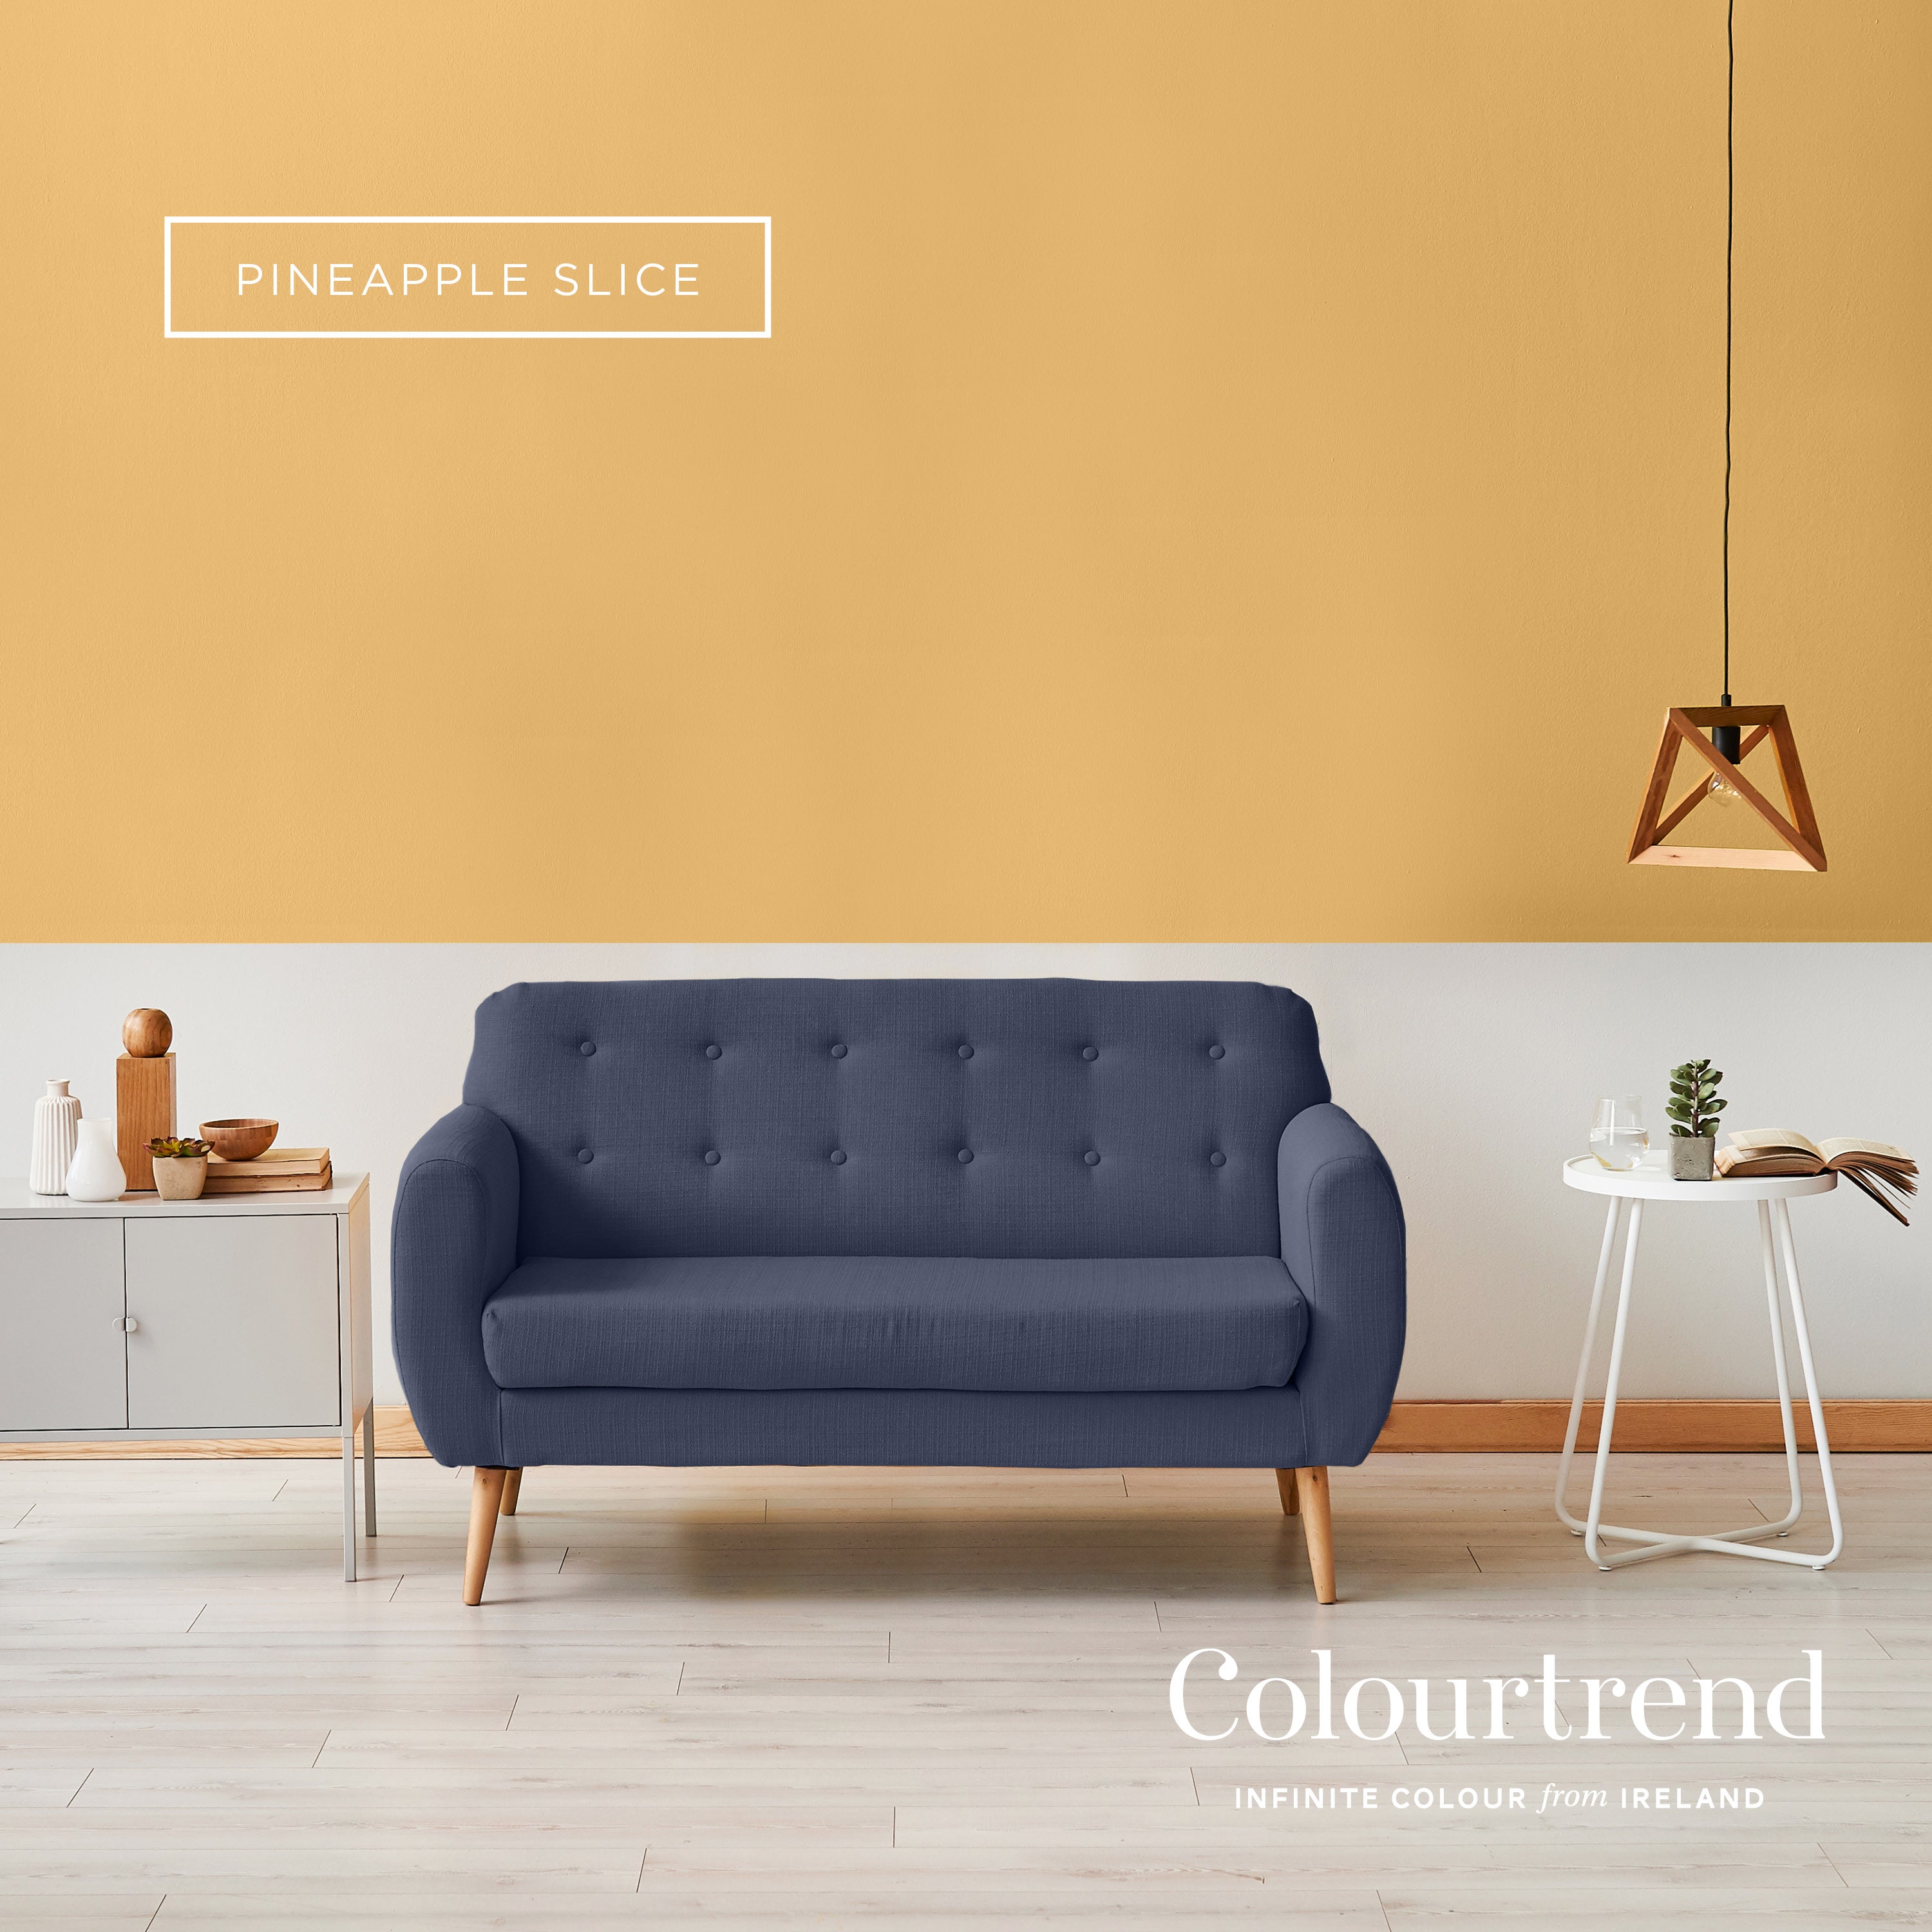 Colourtrend Pineapple Slice | Same Day Dublin and Nationwide Paint in Ireland Delivery by Weirs of Baggot Street - Official Colourtrend Stockist